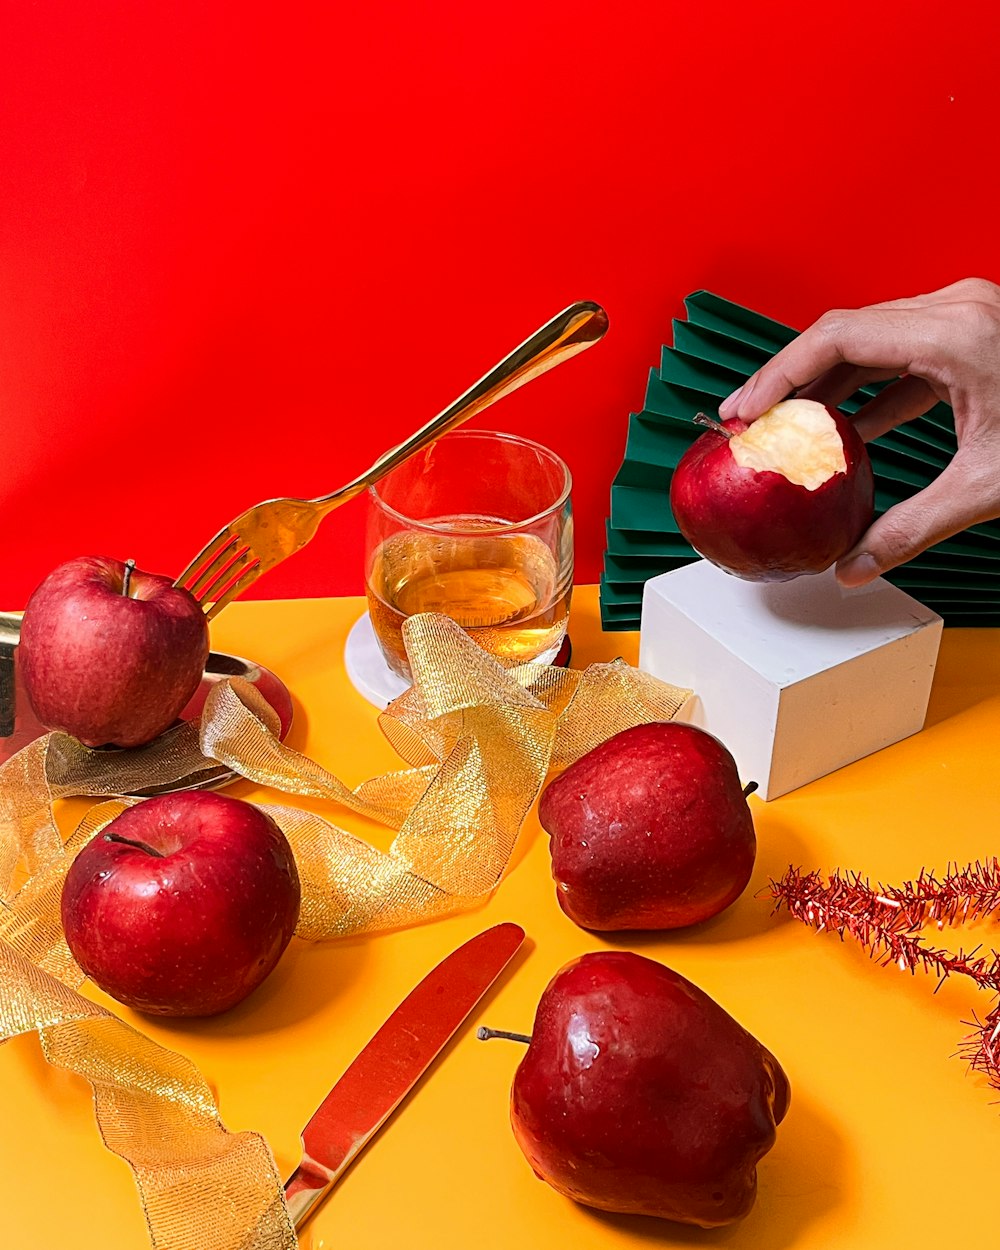 a person is peeling an apple with a knife